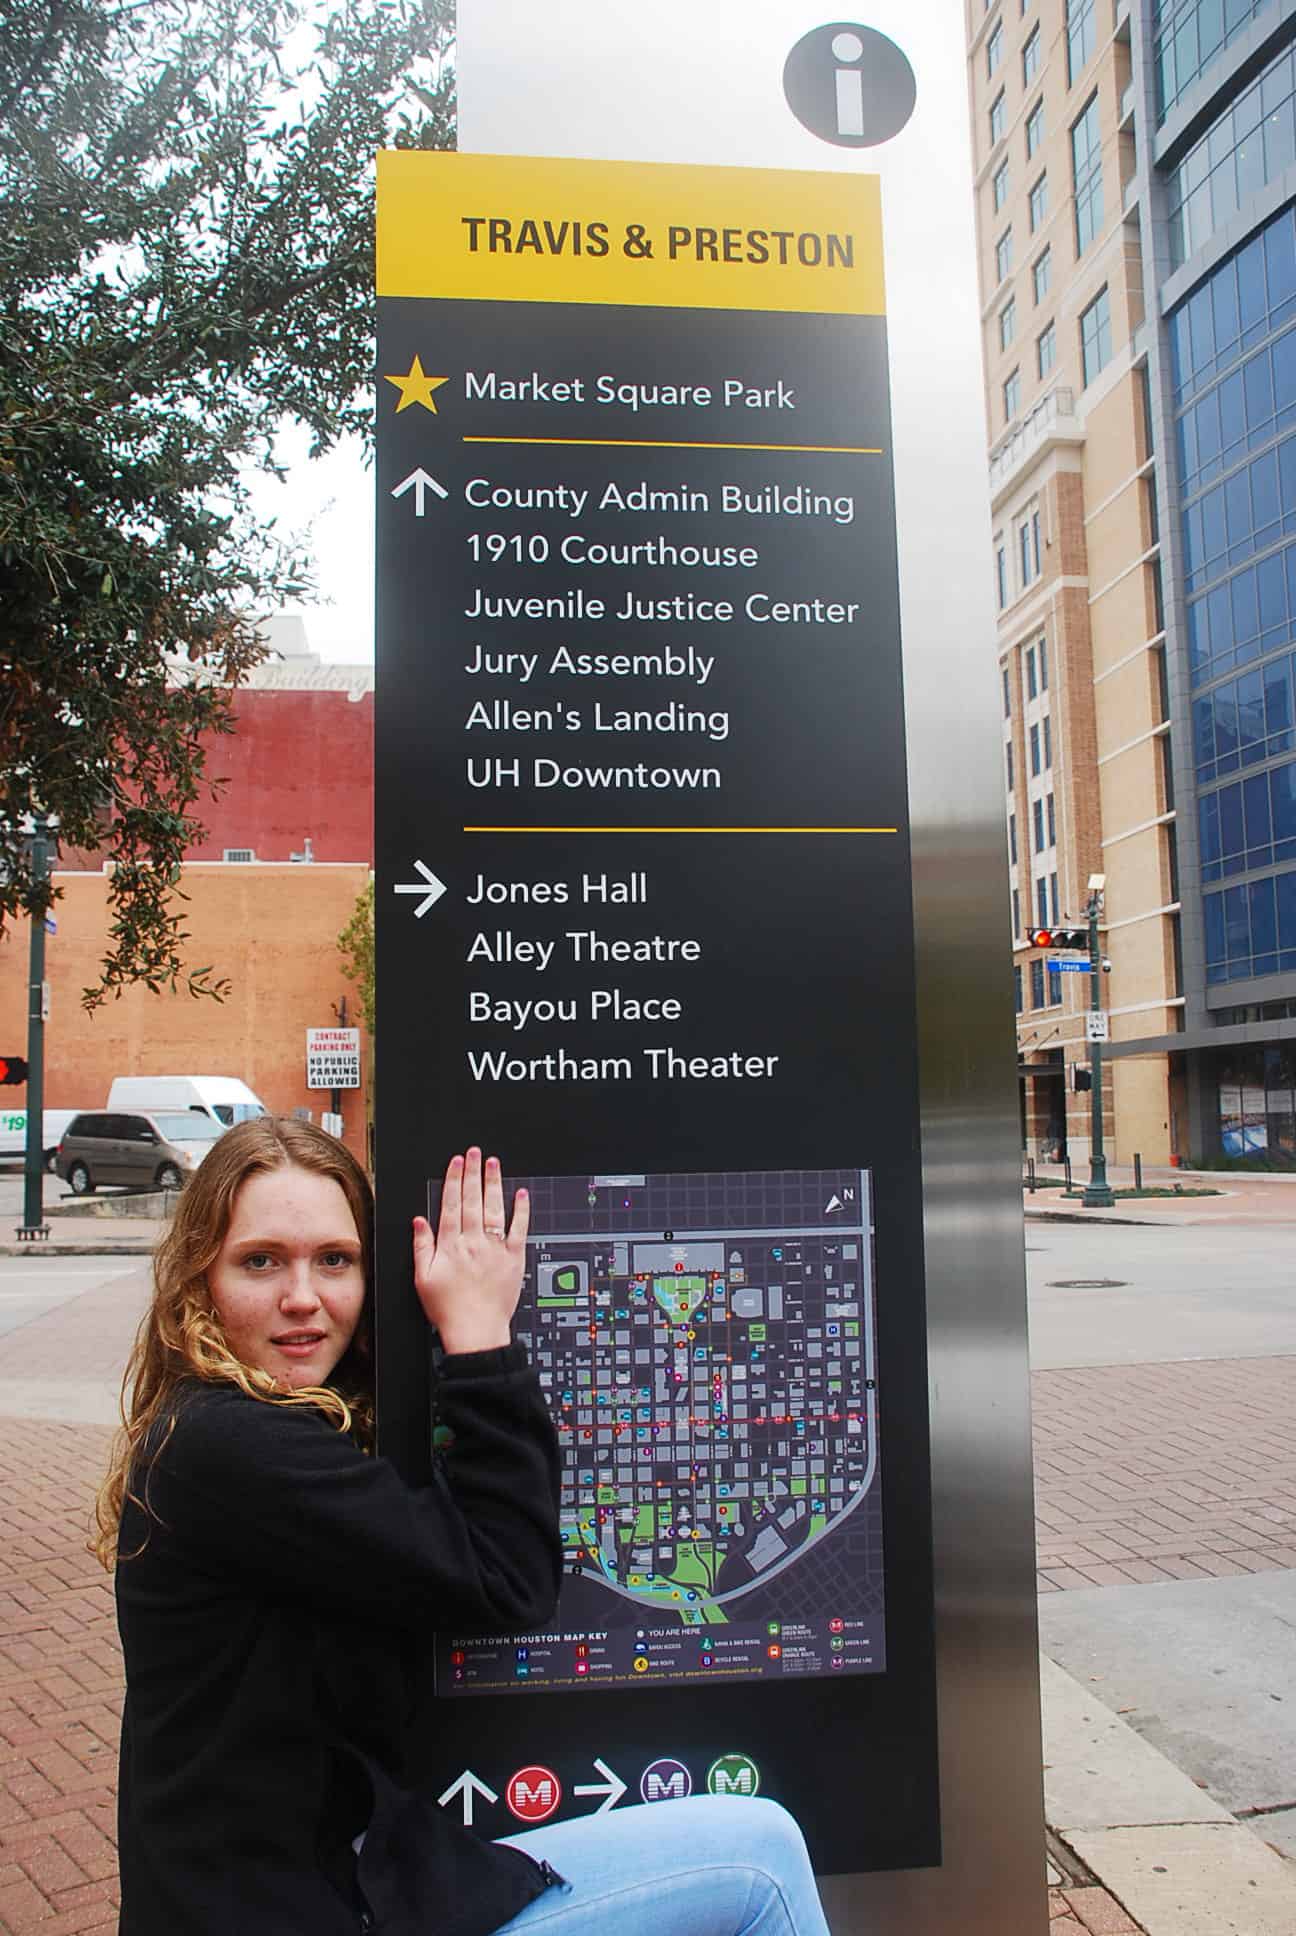 Downtown Map and Directions at Market Square Park